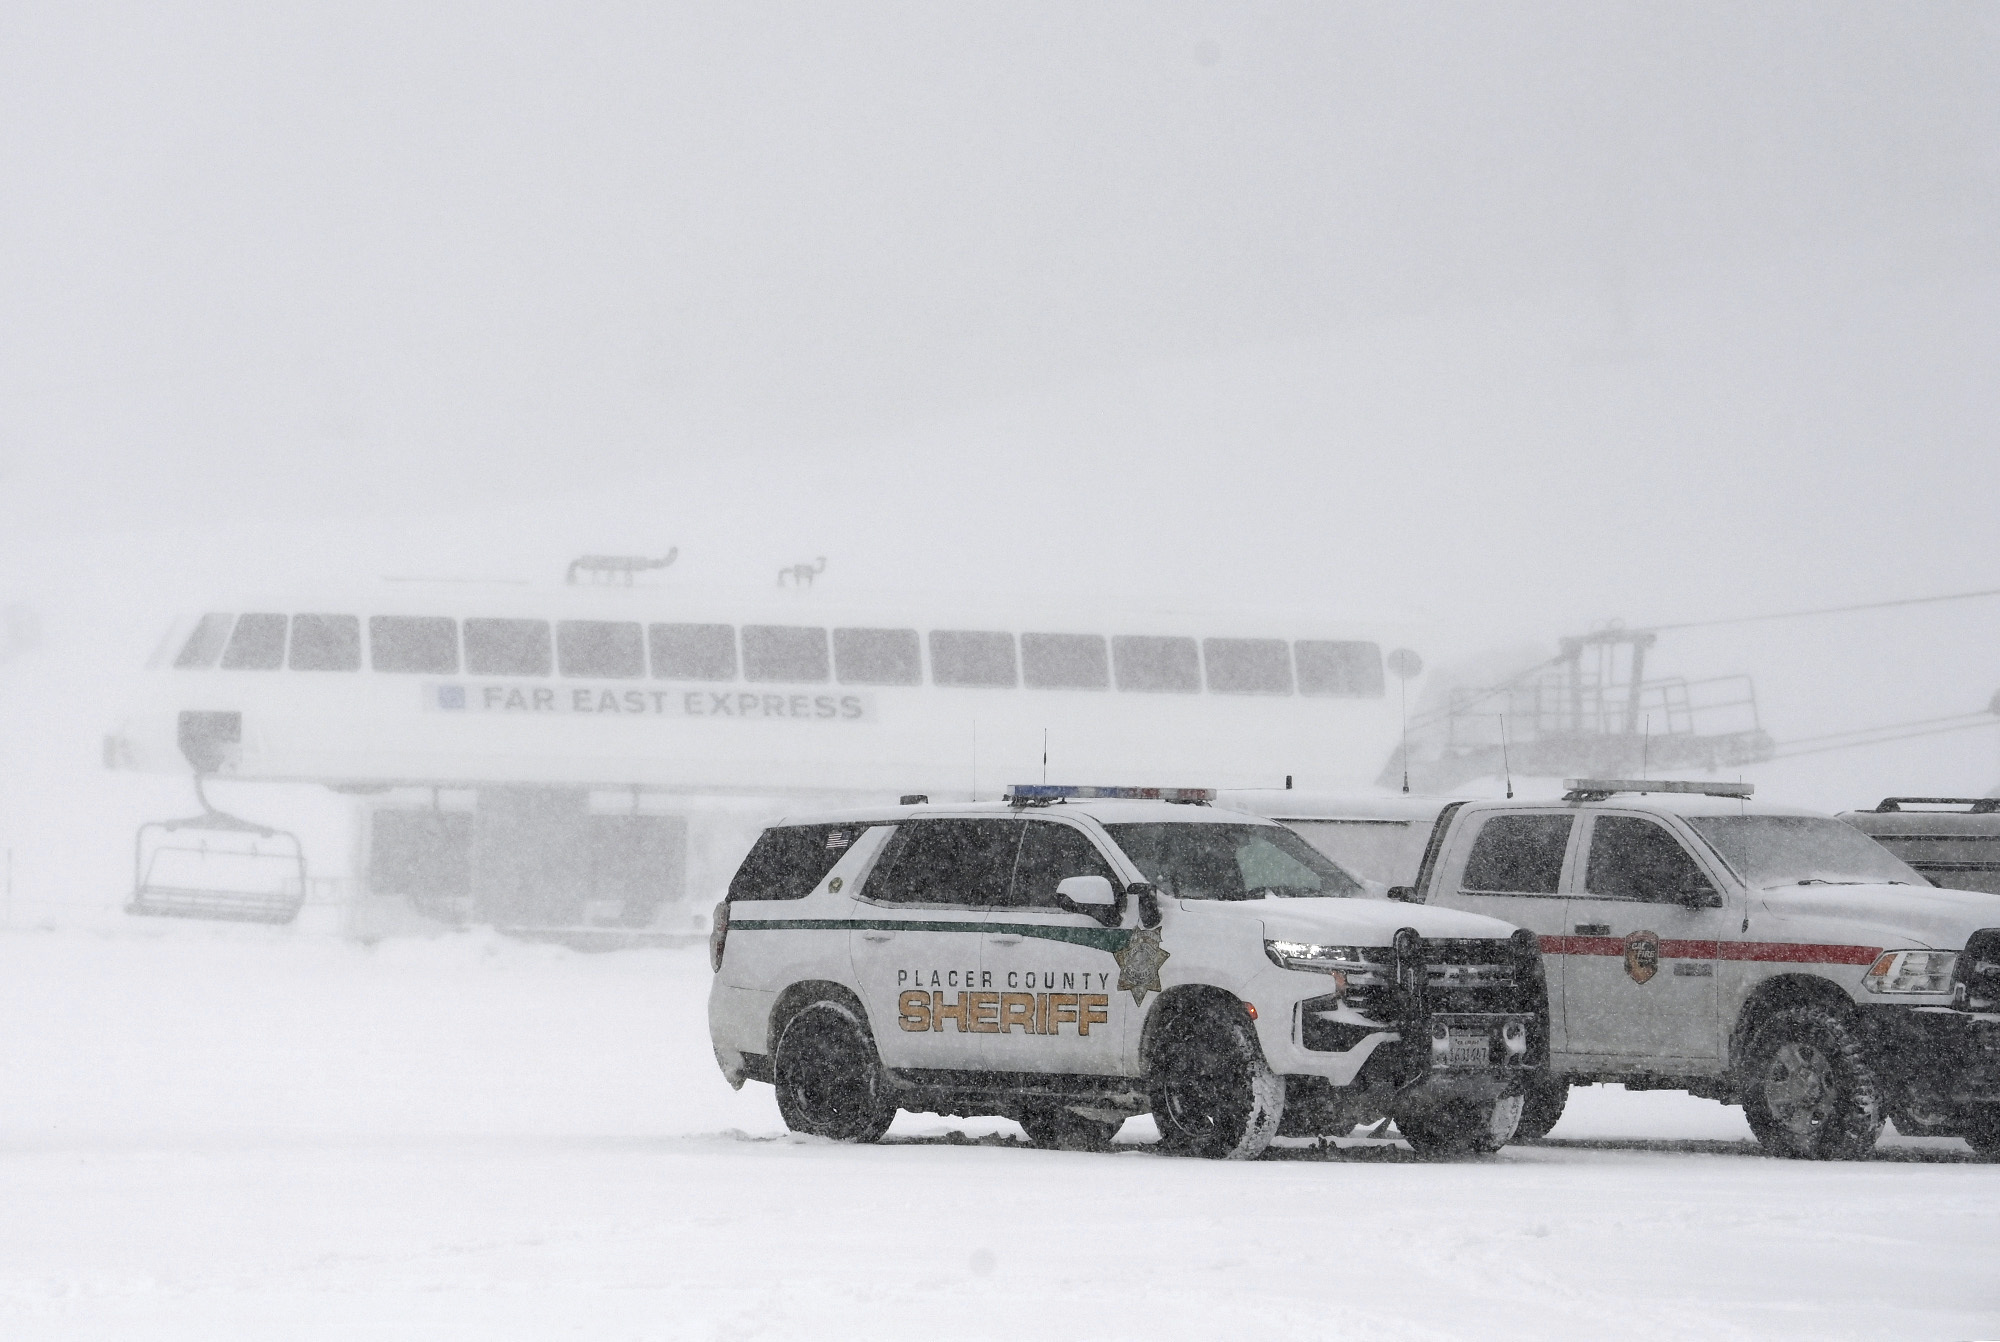 Placer County sheriff vehicles are parked near the ski lift at Palisades Tahoe where avalanche occu...